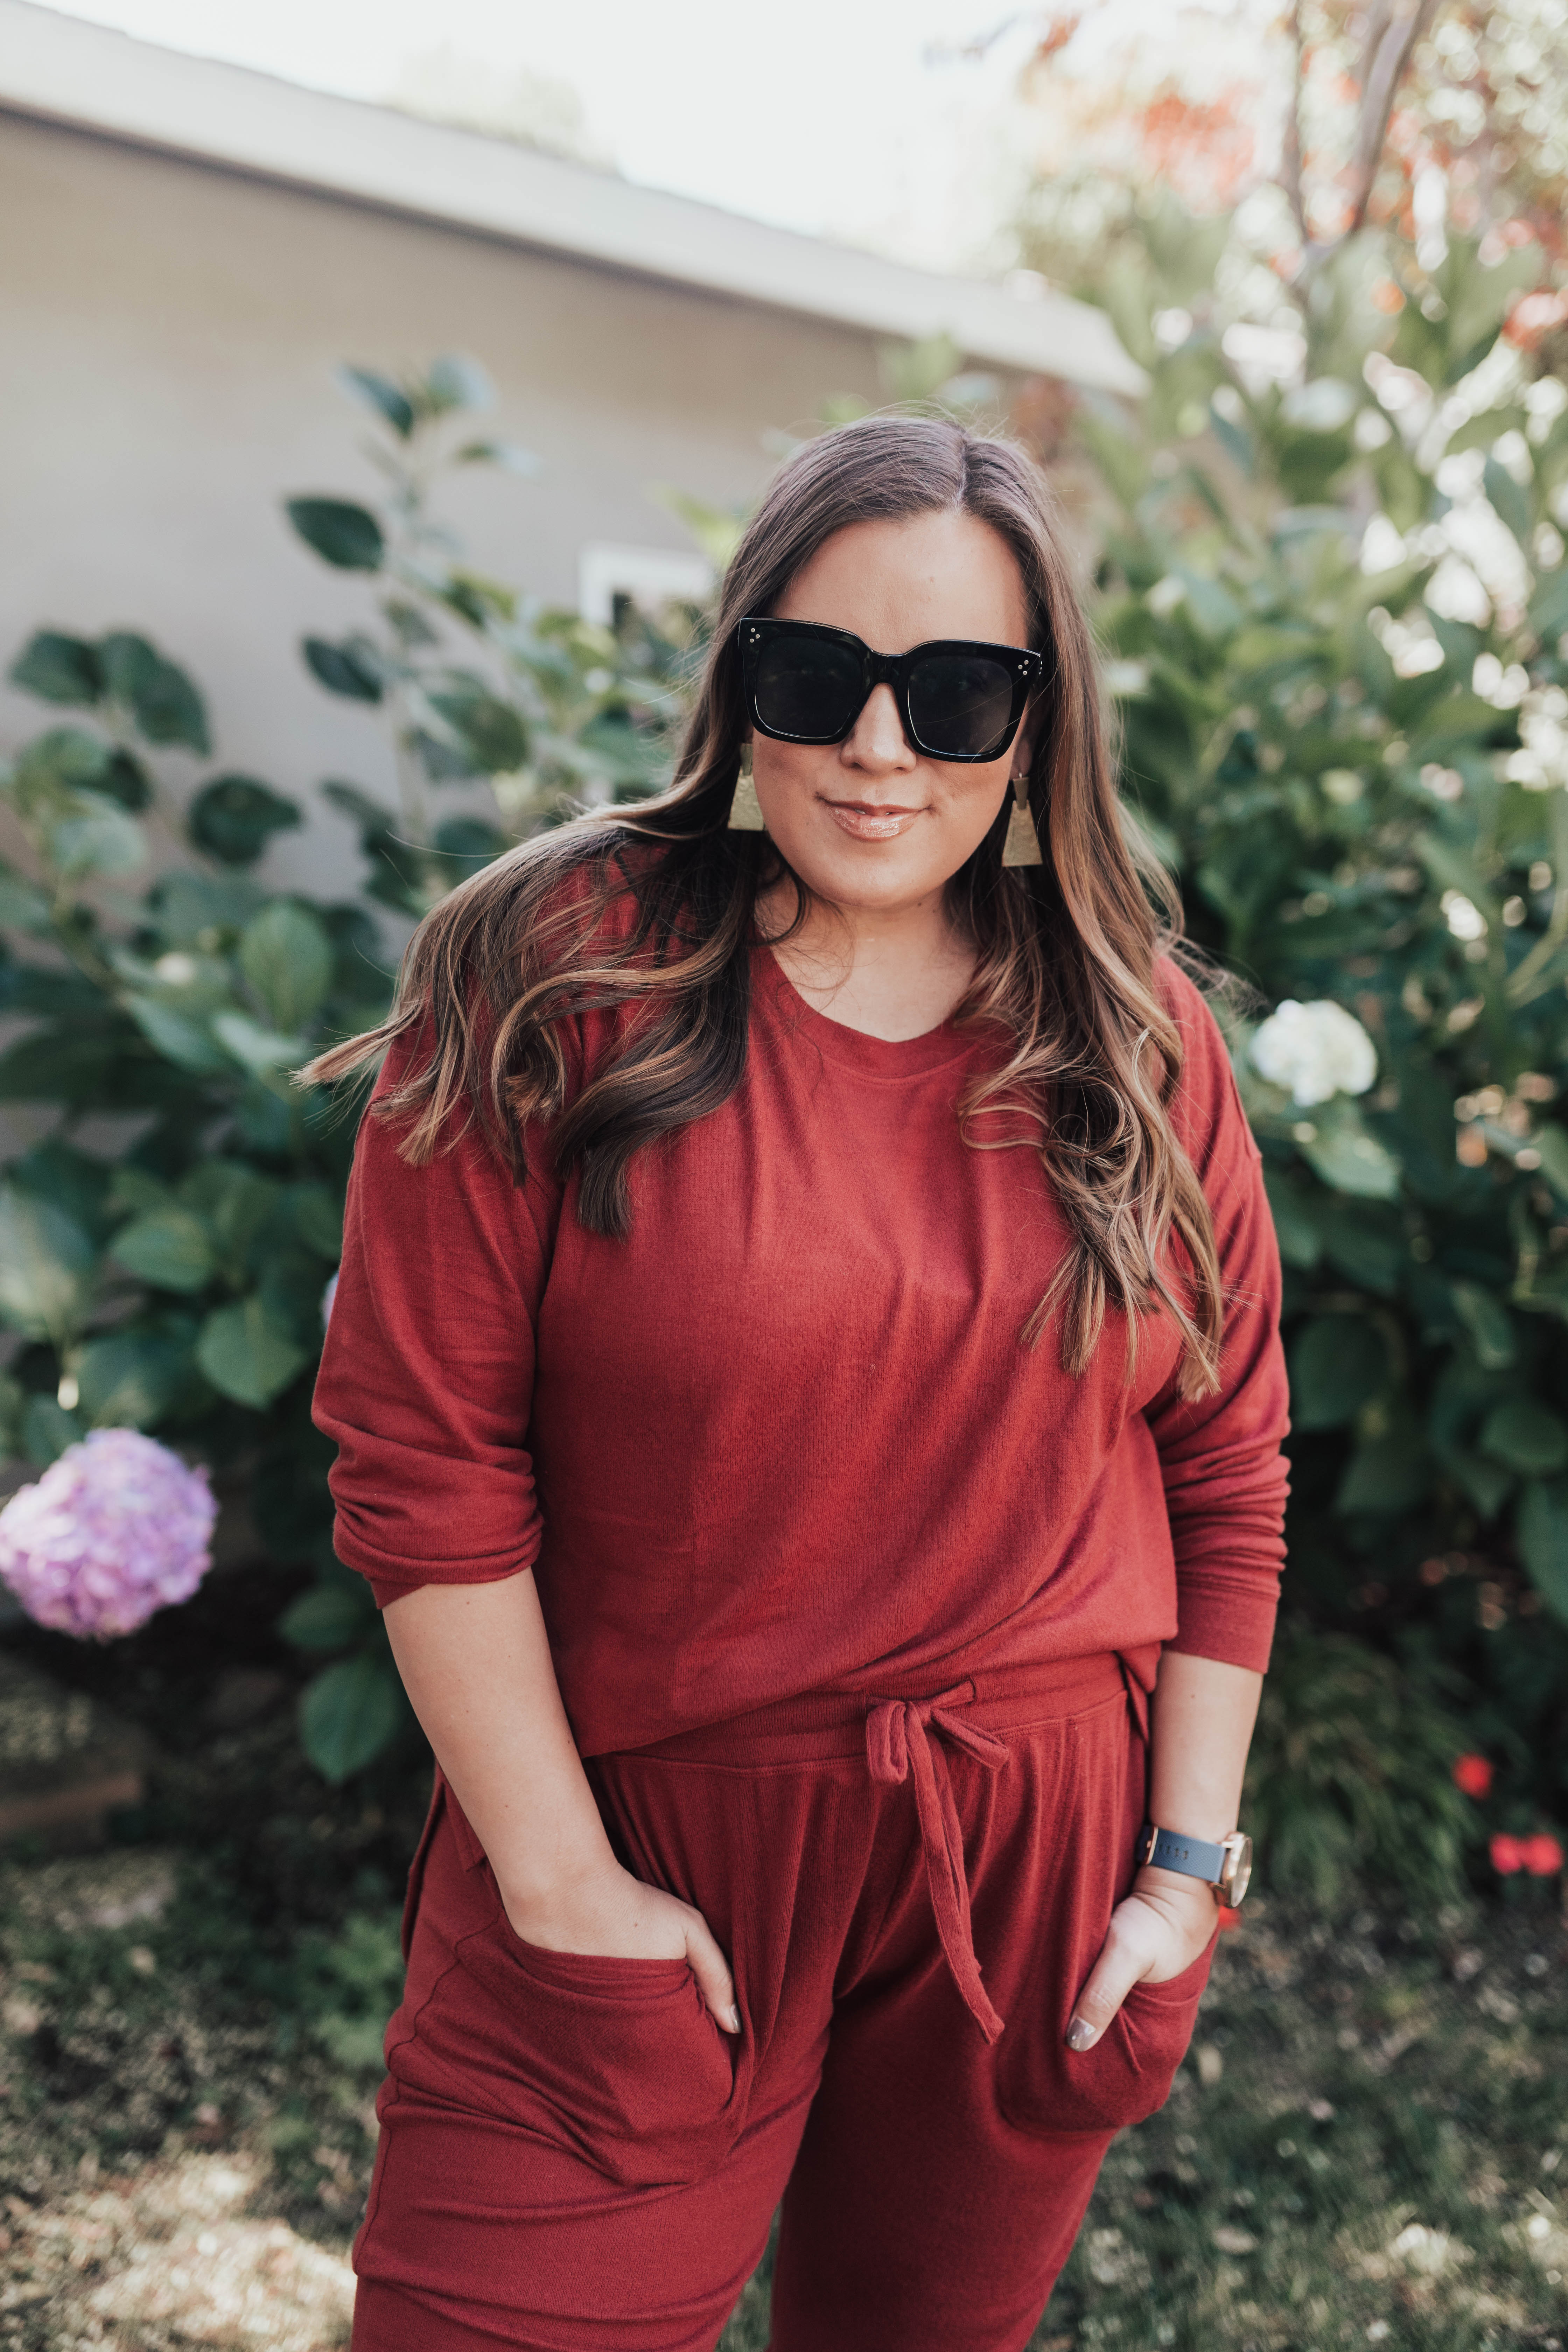 San Francisco blogger Ashley Zeal from Two Peas in a Prada shares her favorite loungewear essentials for fall from Nordstrom.